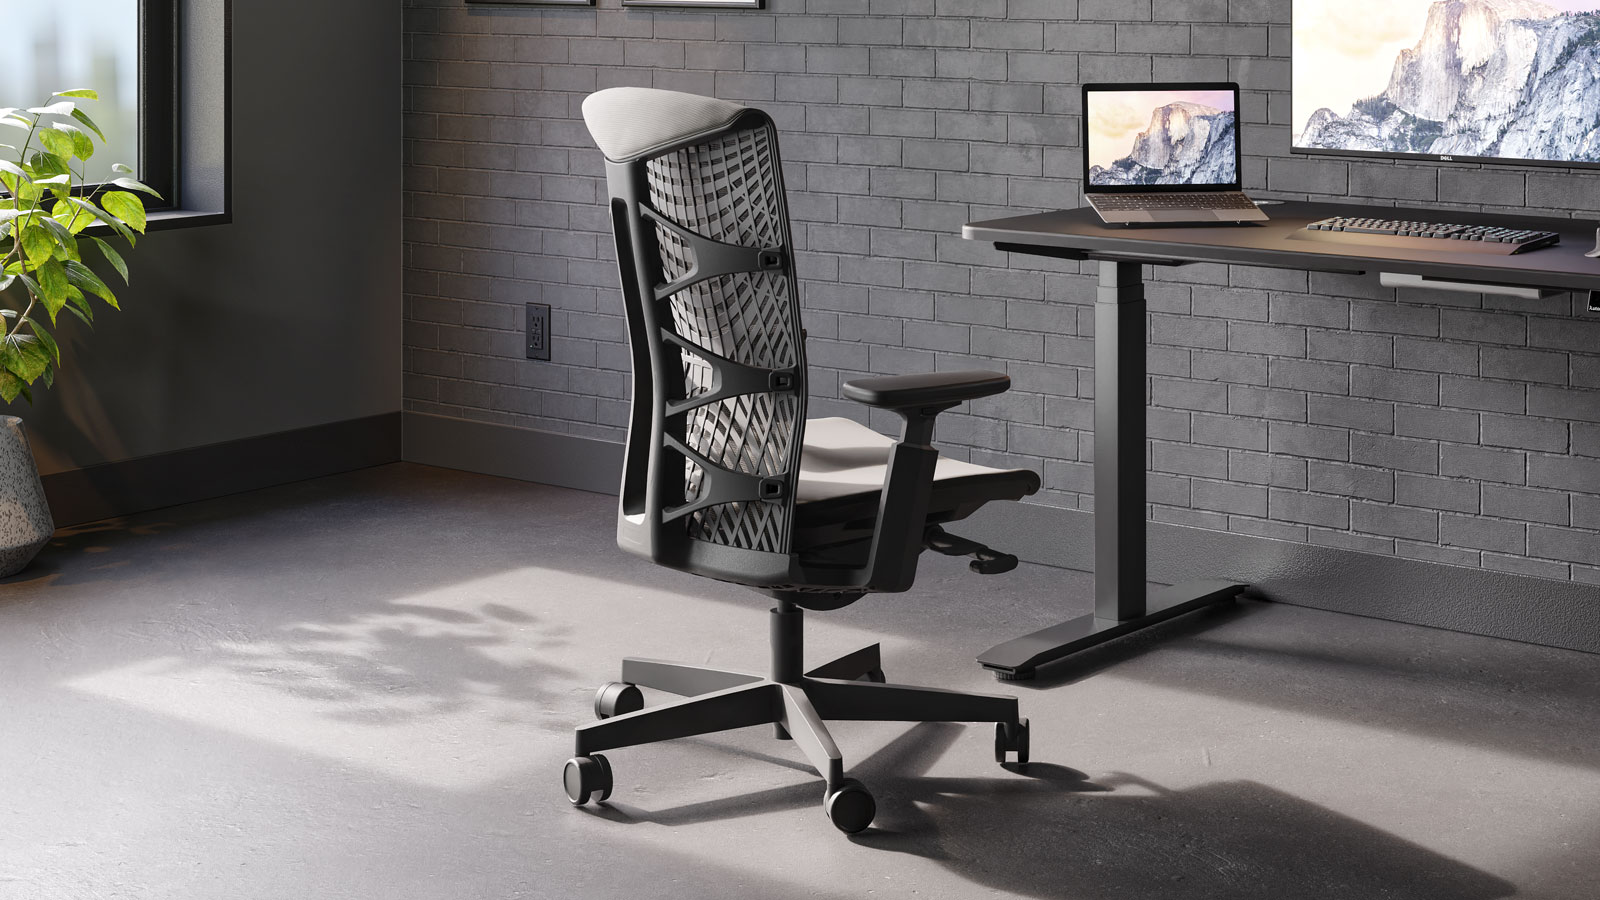 Ergonomic Office Chairs for Better Health and Comfort